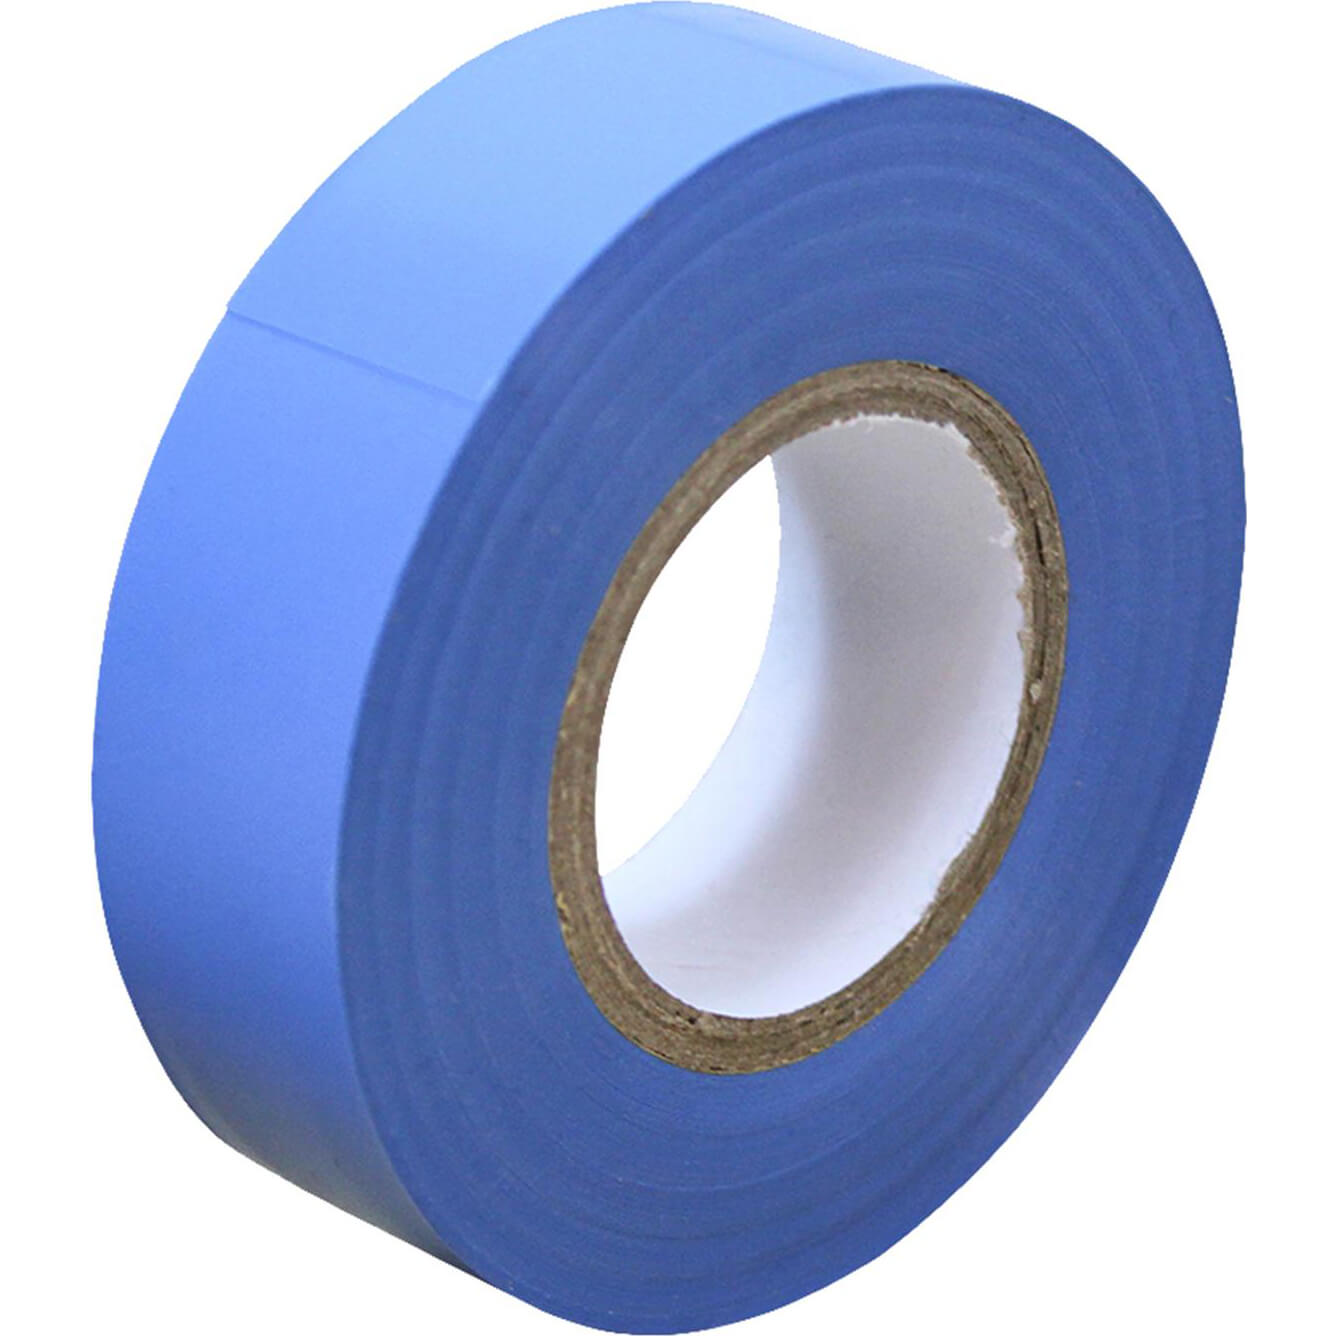 Insulation Tape Blue 19mm Wide x 33m Roll